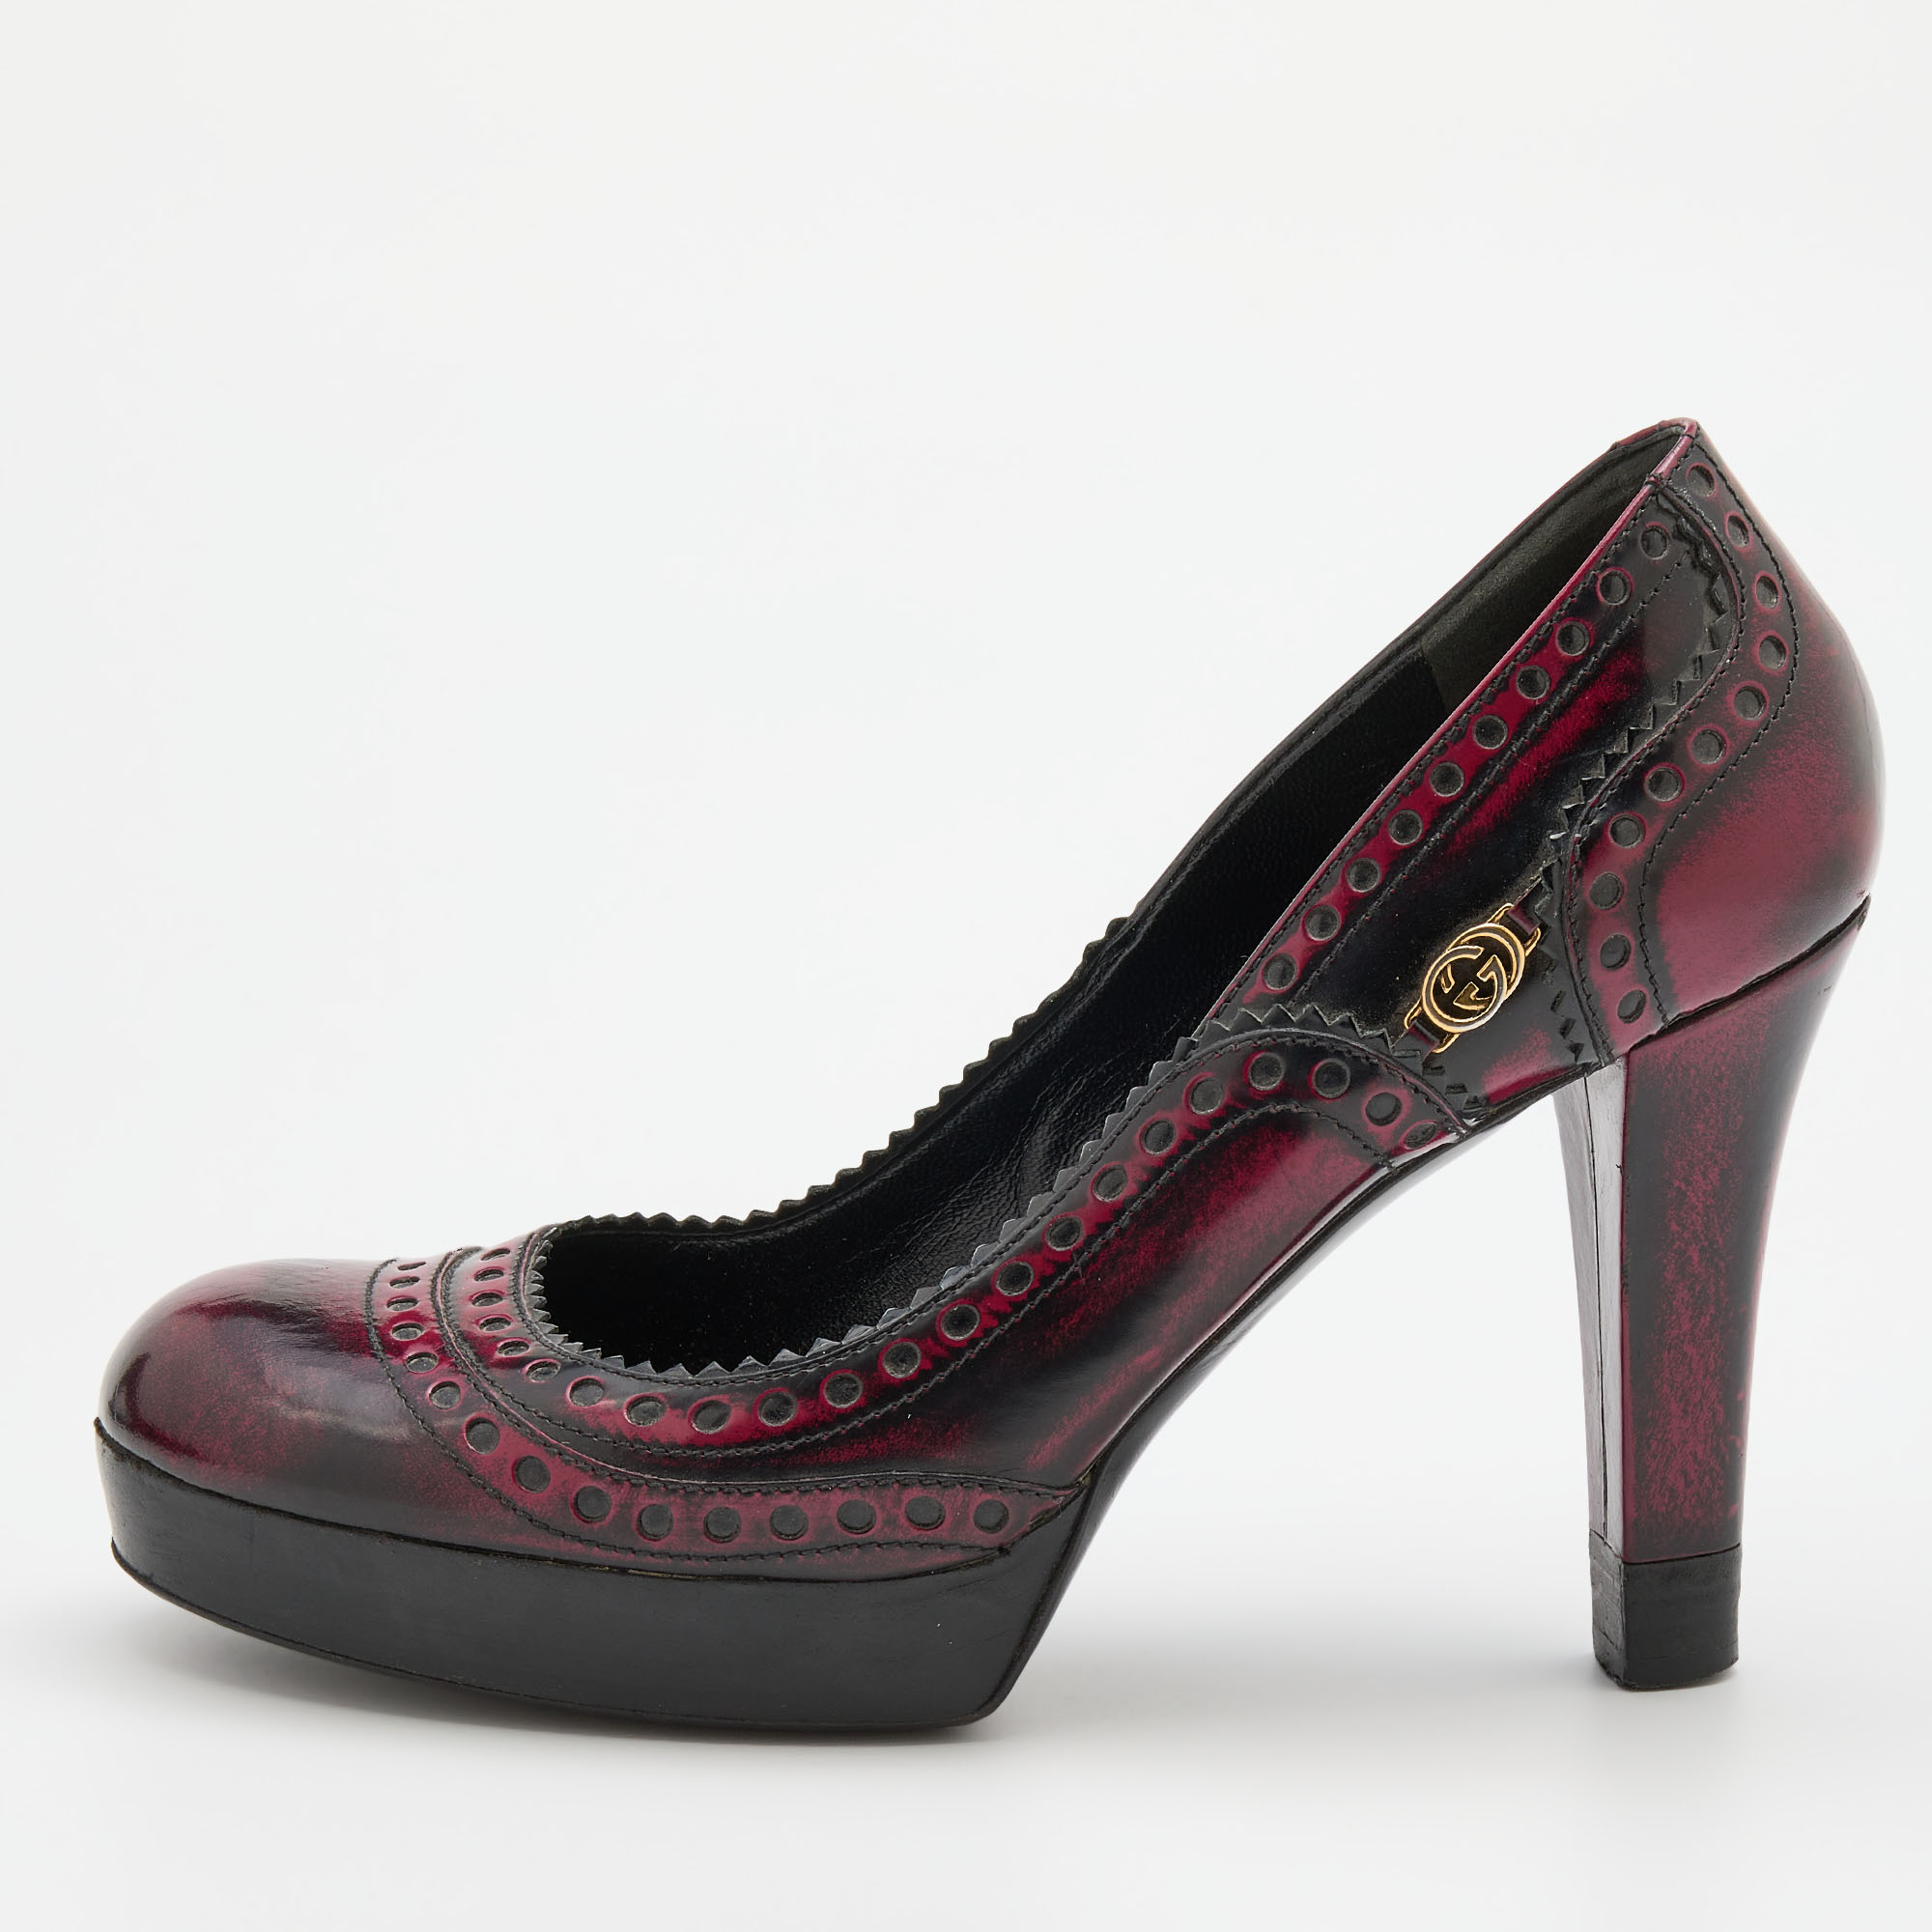 Gucci Black/Red Two-Tone Brogue Leather Platform Pumps Size 40.5